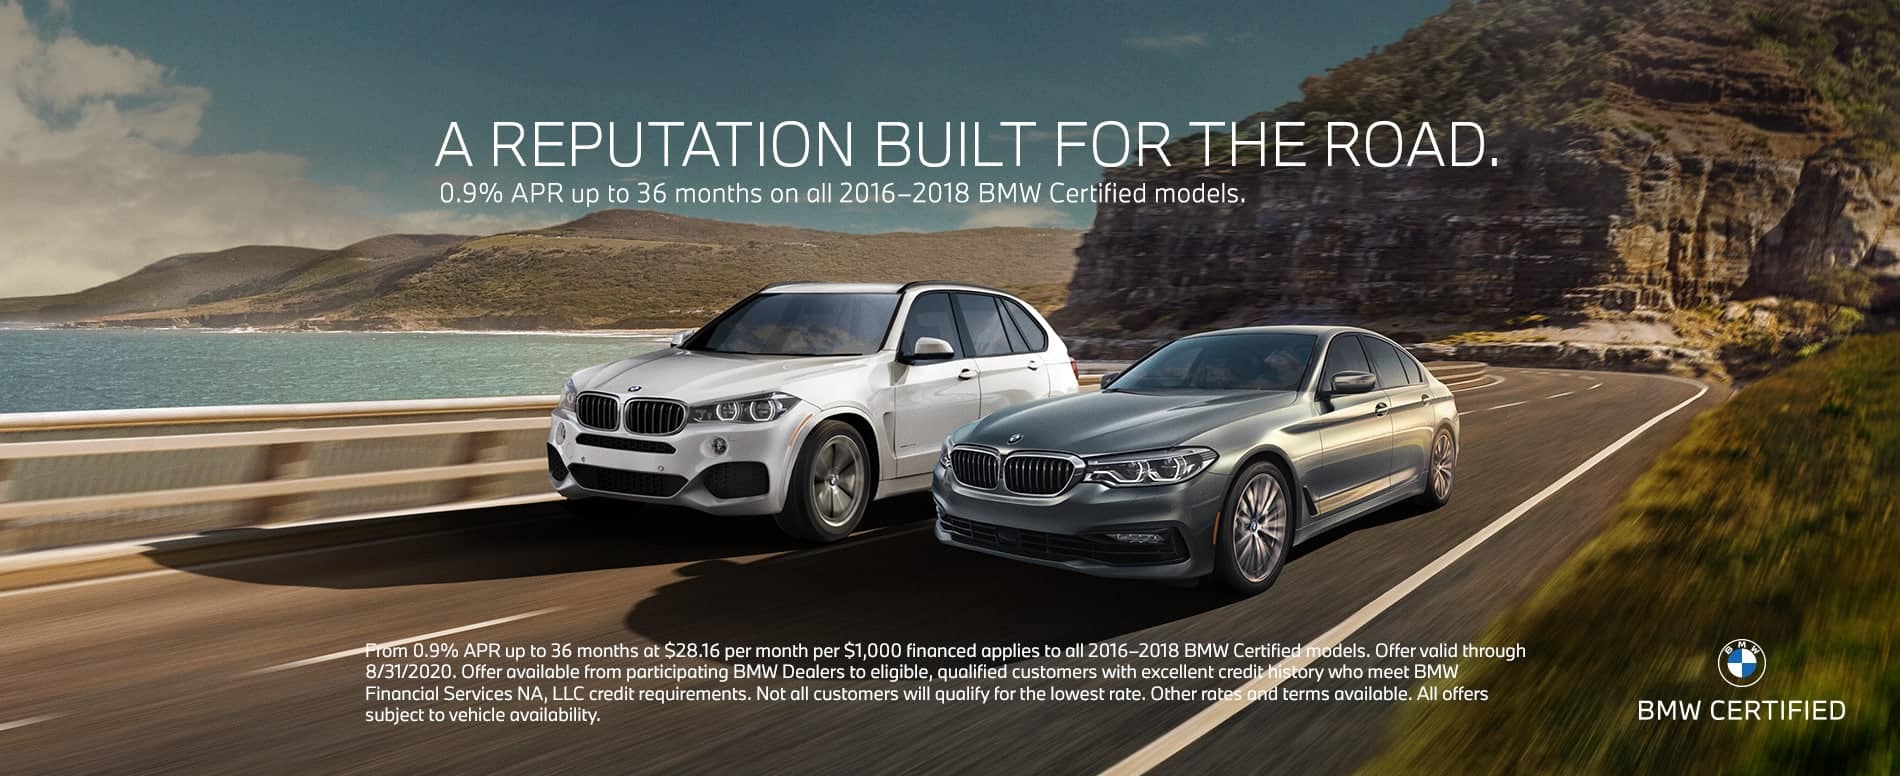 Rallye Bmw New Pre Owned Bmw Dealer In Long Island Ny